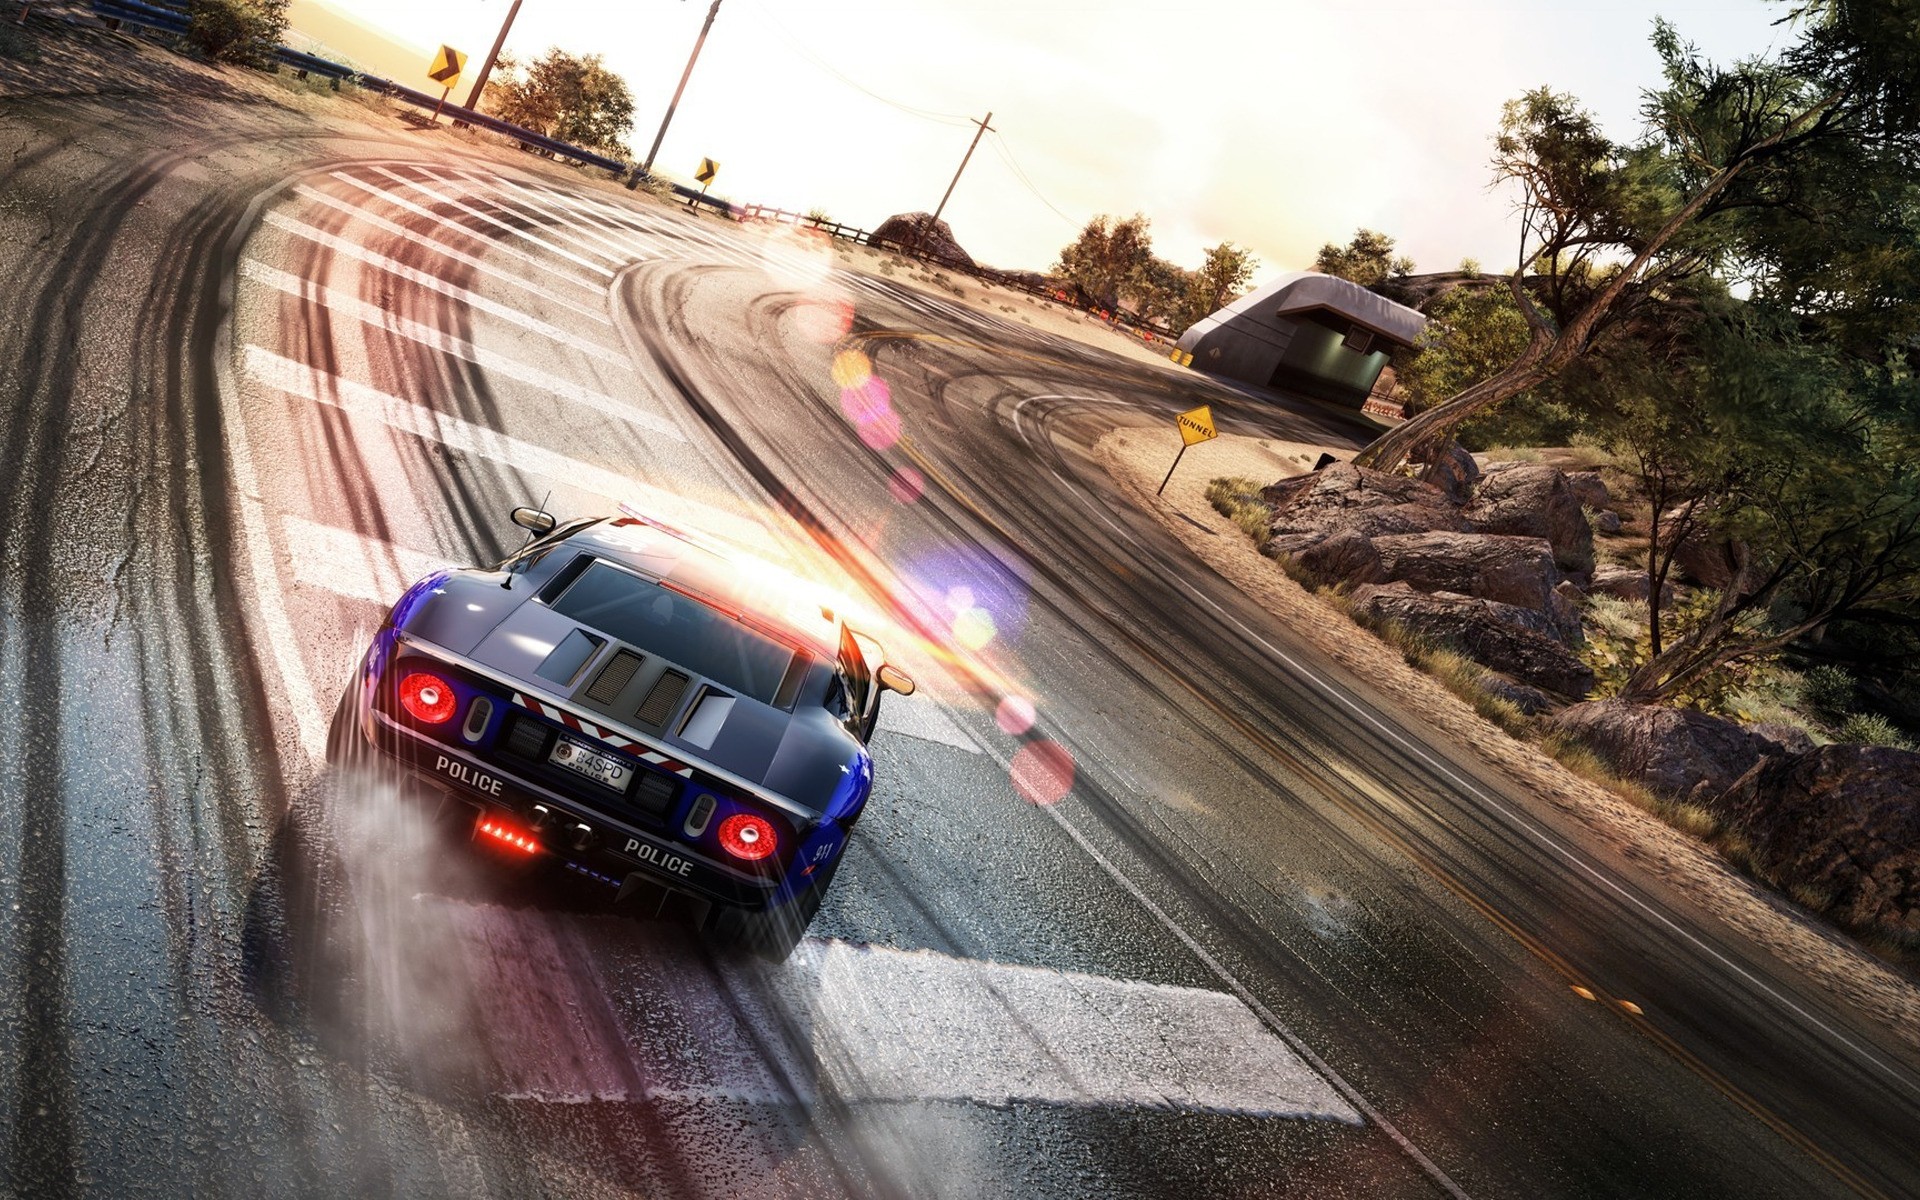 Гонки на машинах дрифт. Need for Speed дрифт. Ford gt40 NFS. Need for Speed hot Pursuit Ford Shelby gt500. Нфс погоня.